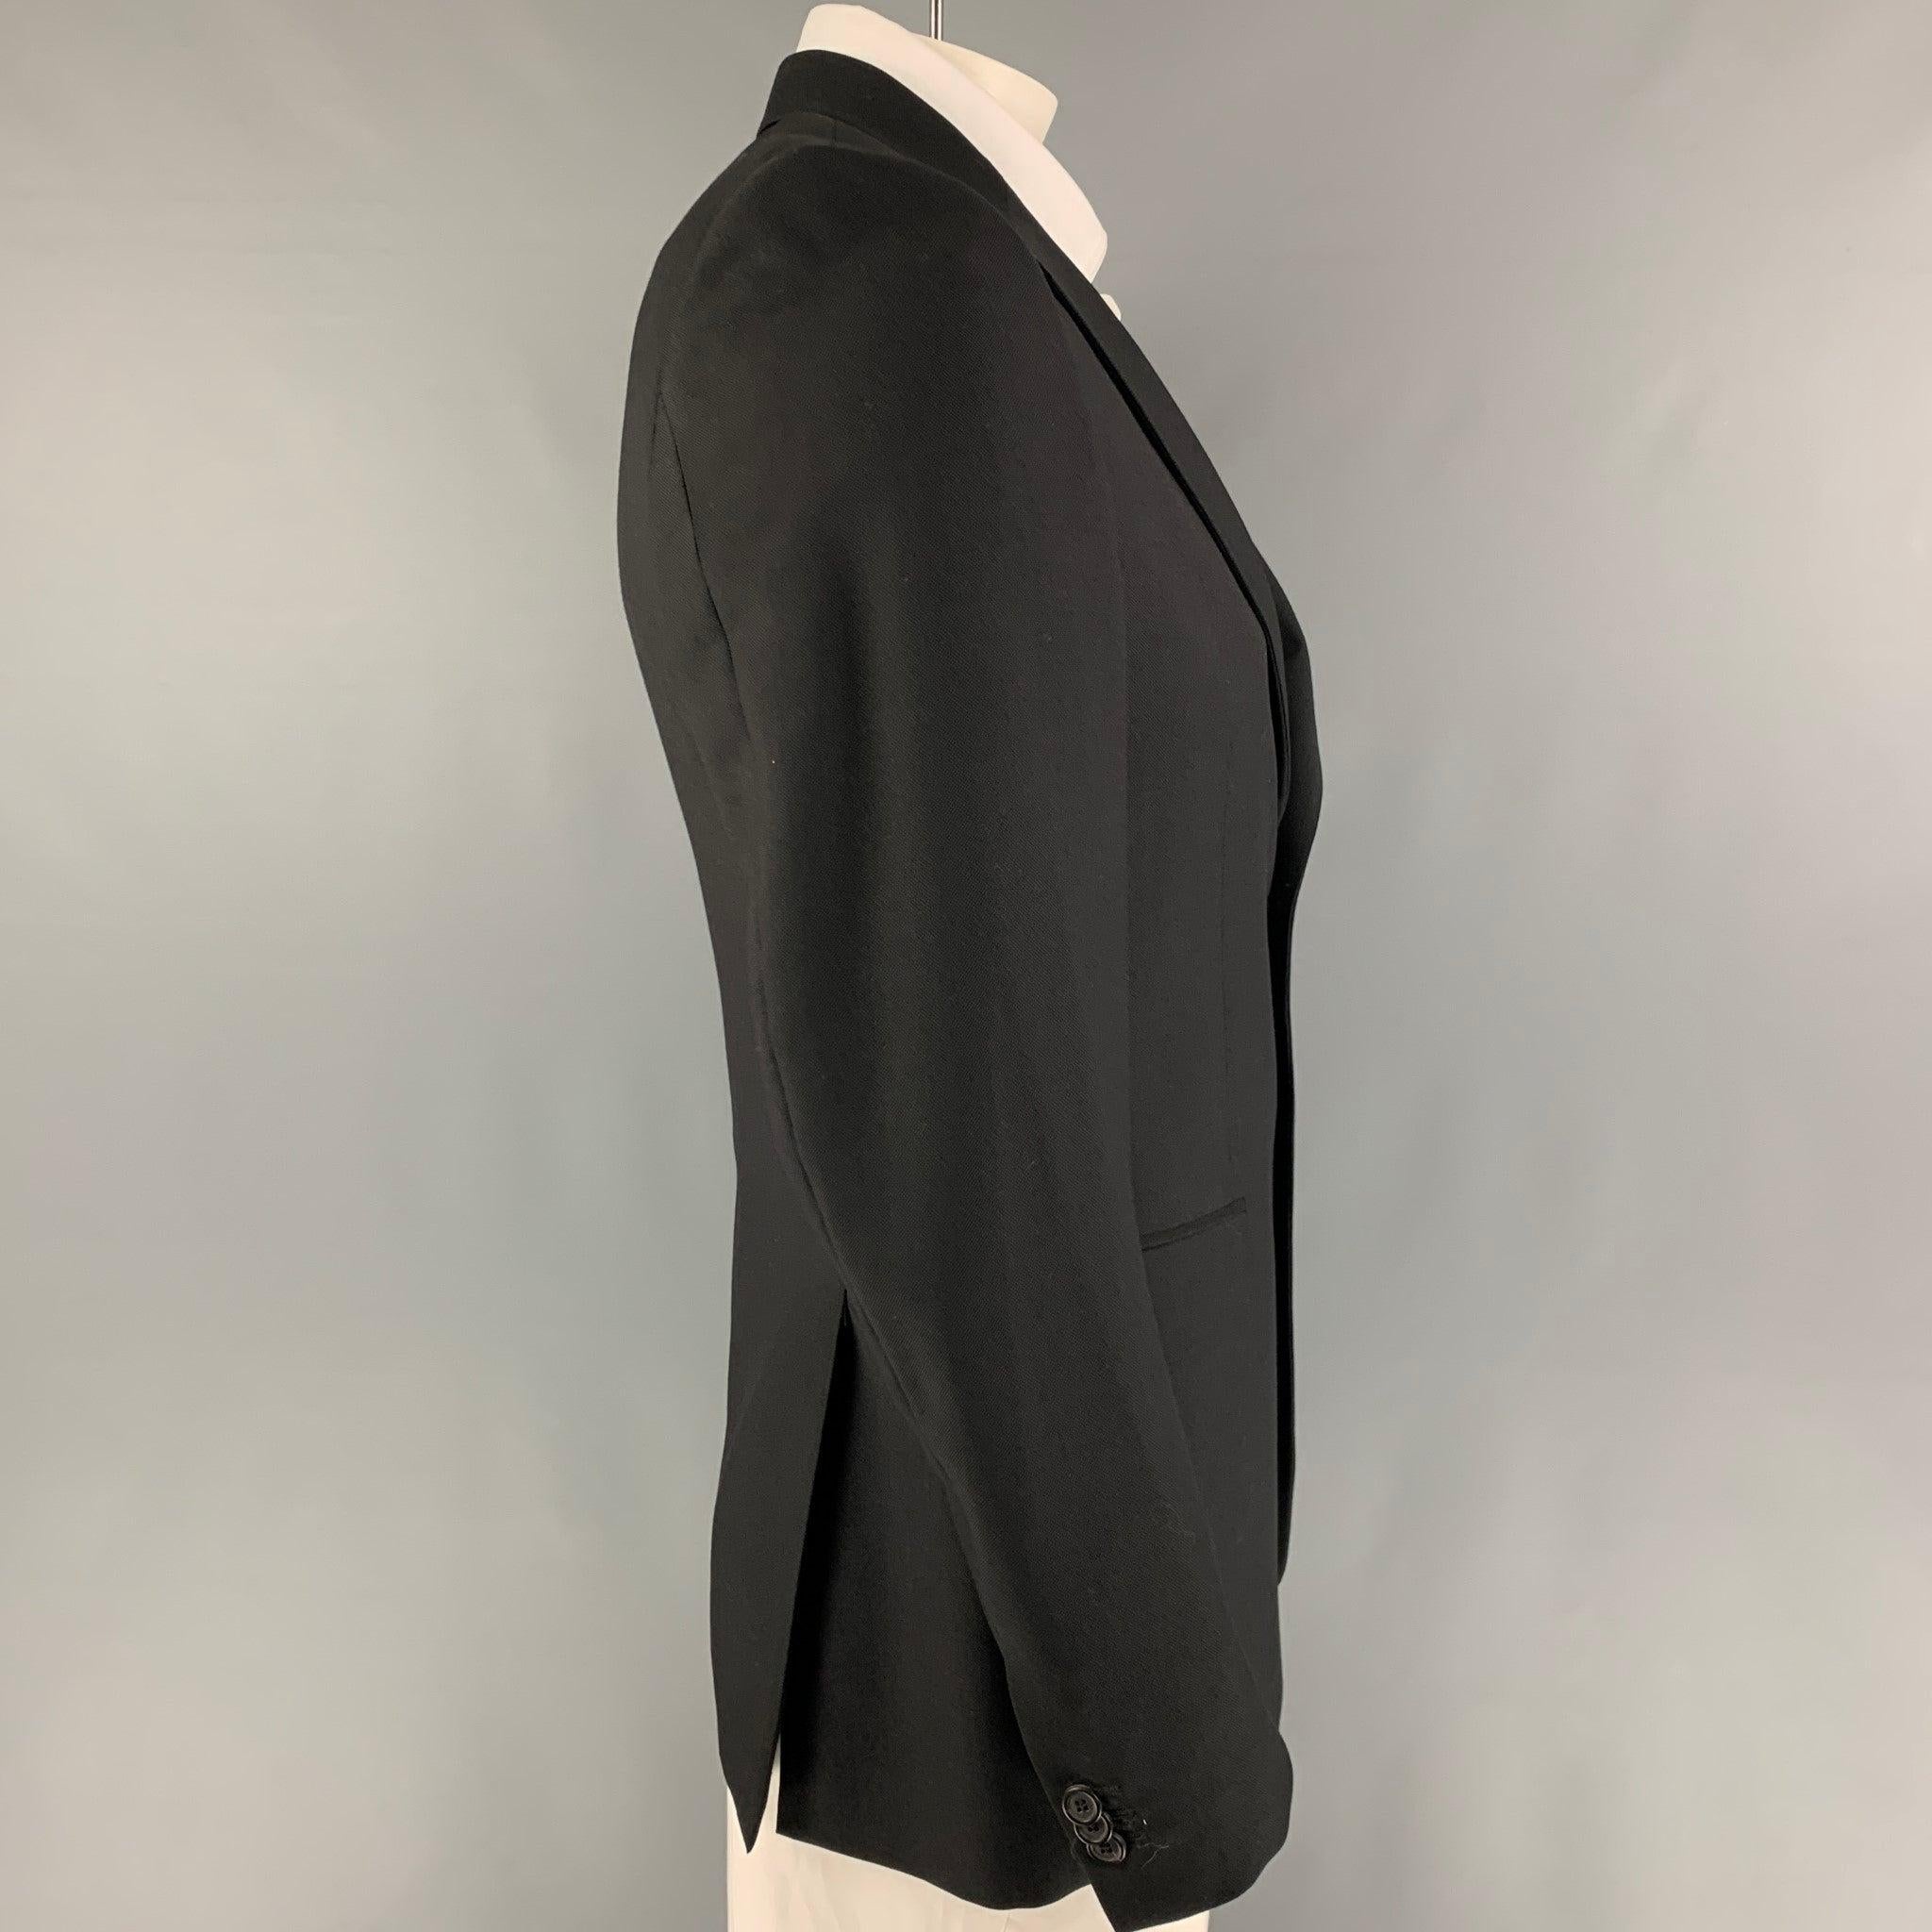 PRADA sport coat comes in a black wool with a full liner featuring a notch lapel, flap pockets, double back vent, and a double button closure.Very Good
Pre-Owned Condition. 

Marked:   50 R  

Measurements: 
 
Shoulder: 18 inches  Chest: 40 inches 